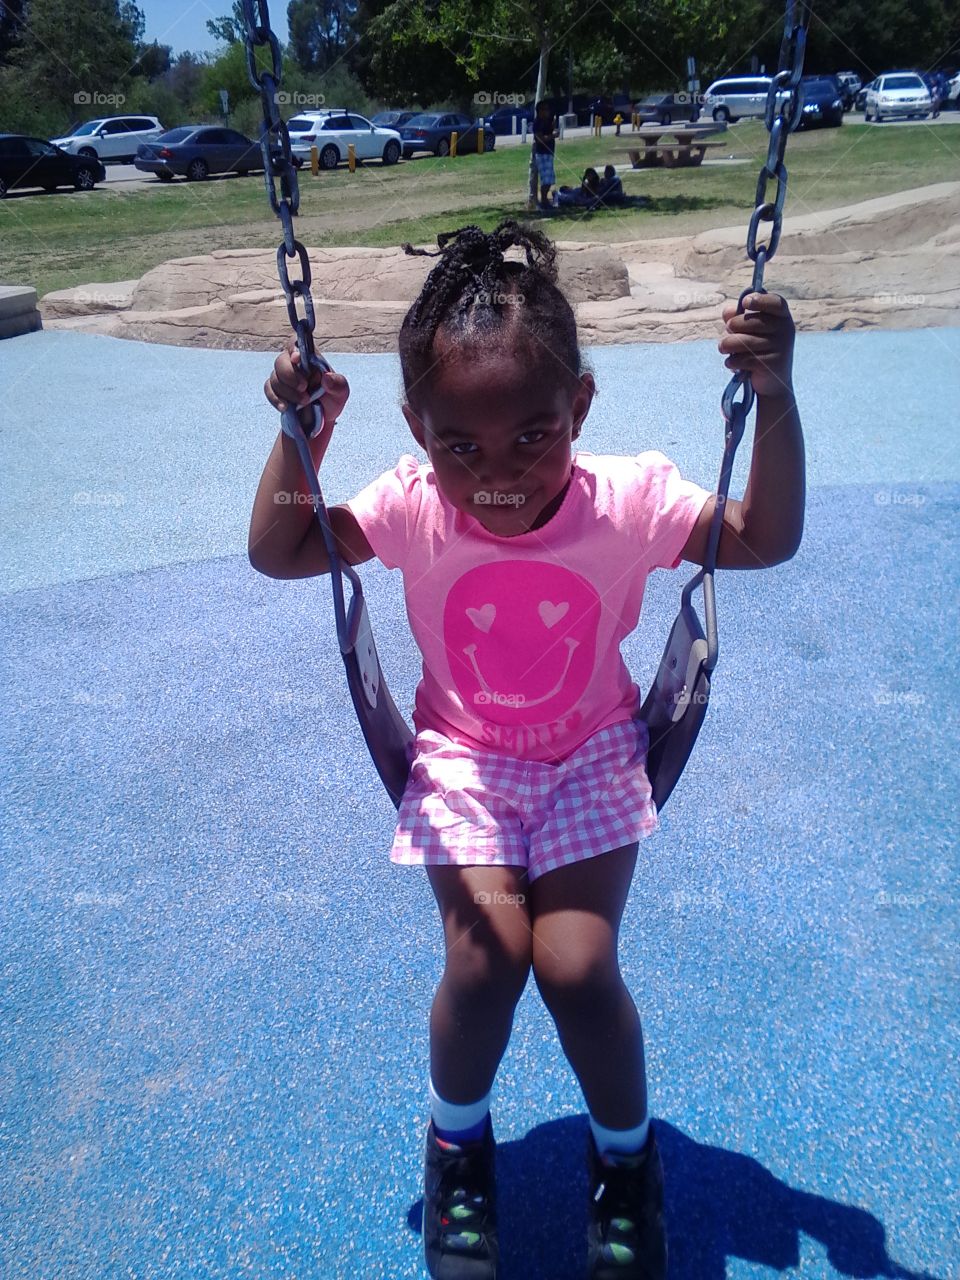 daughter day at the park. my daughter enjoying herself